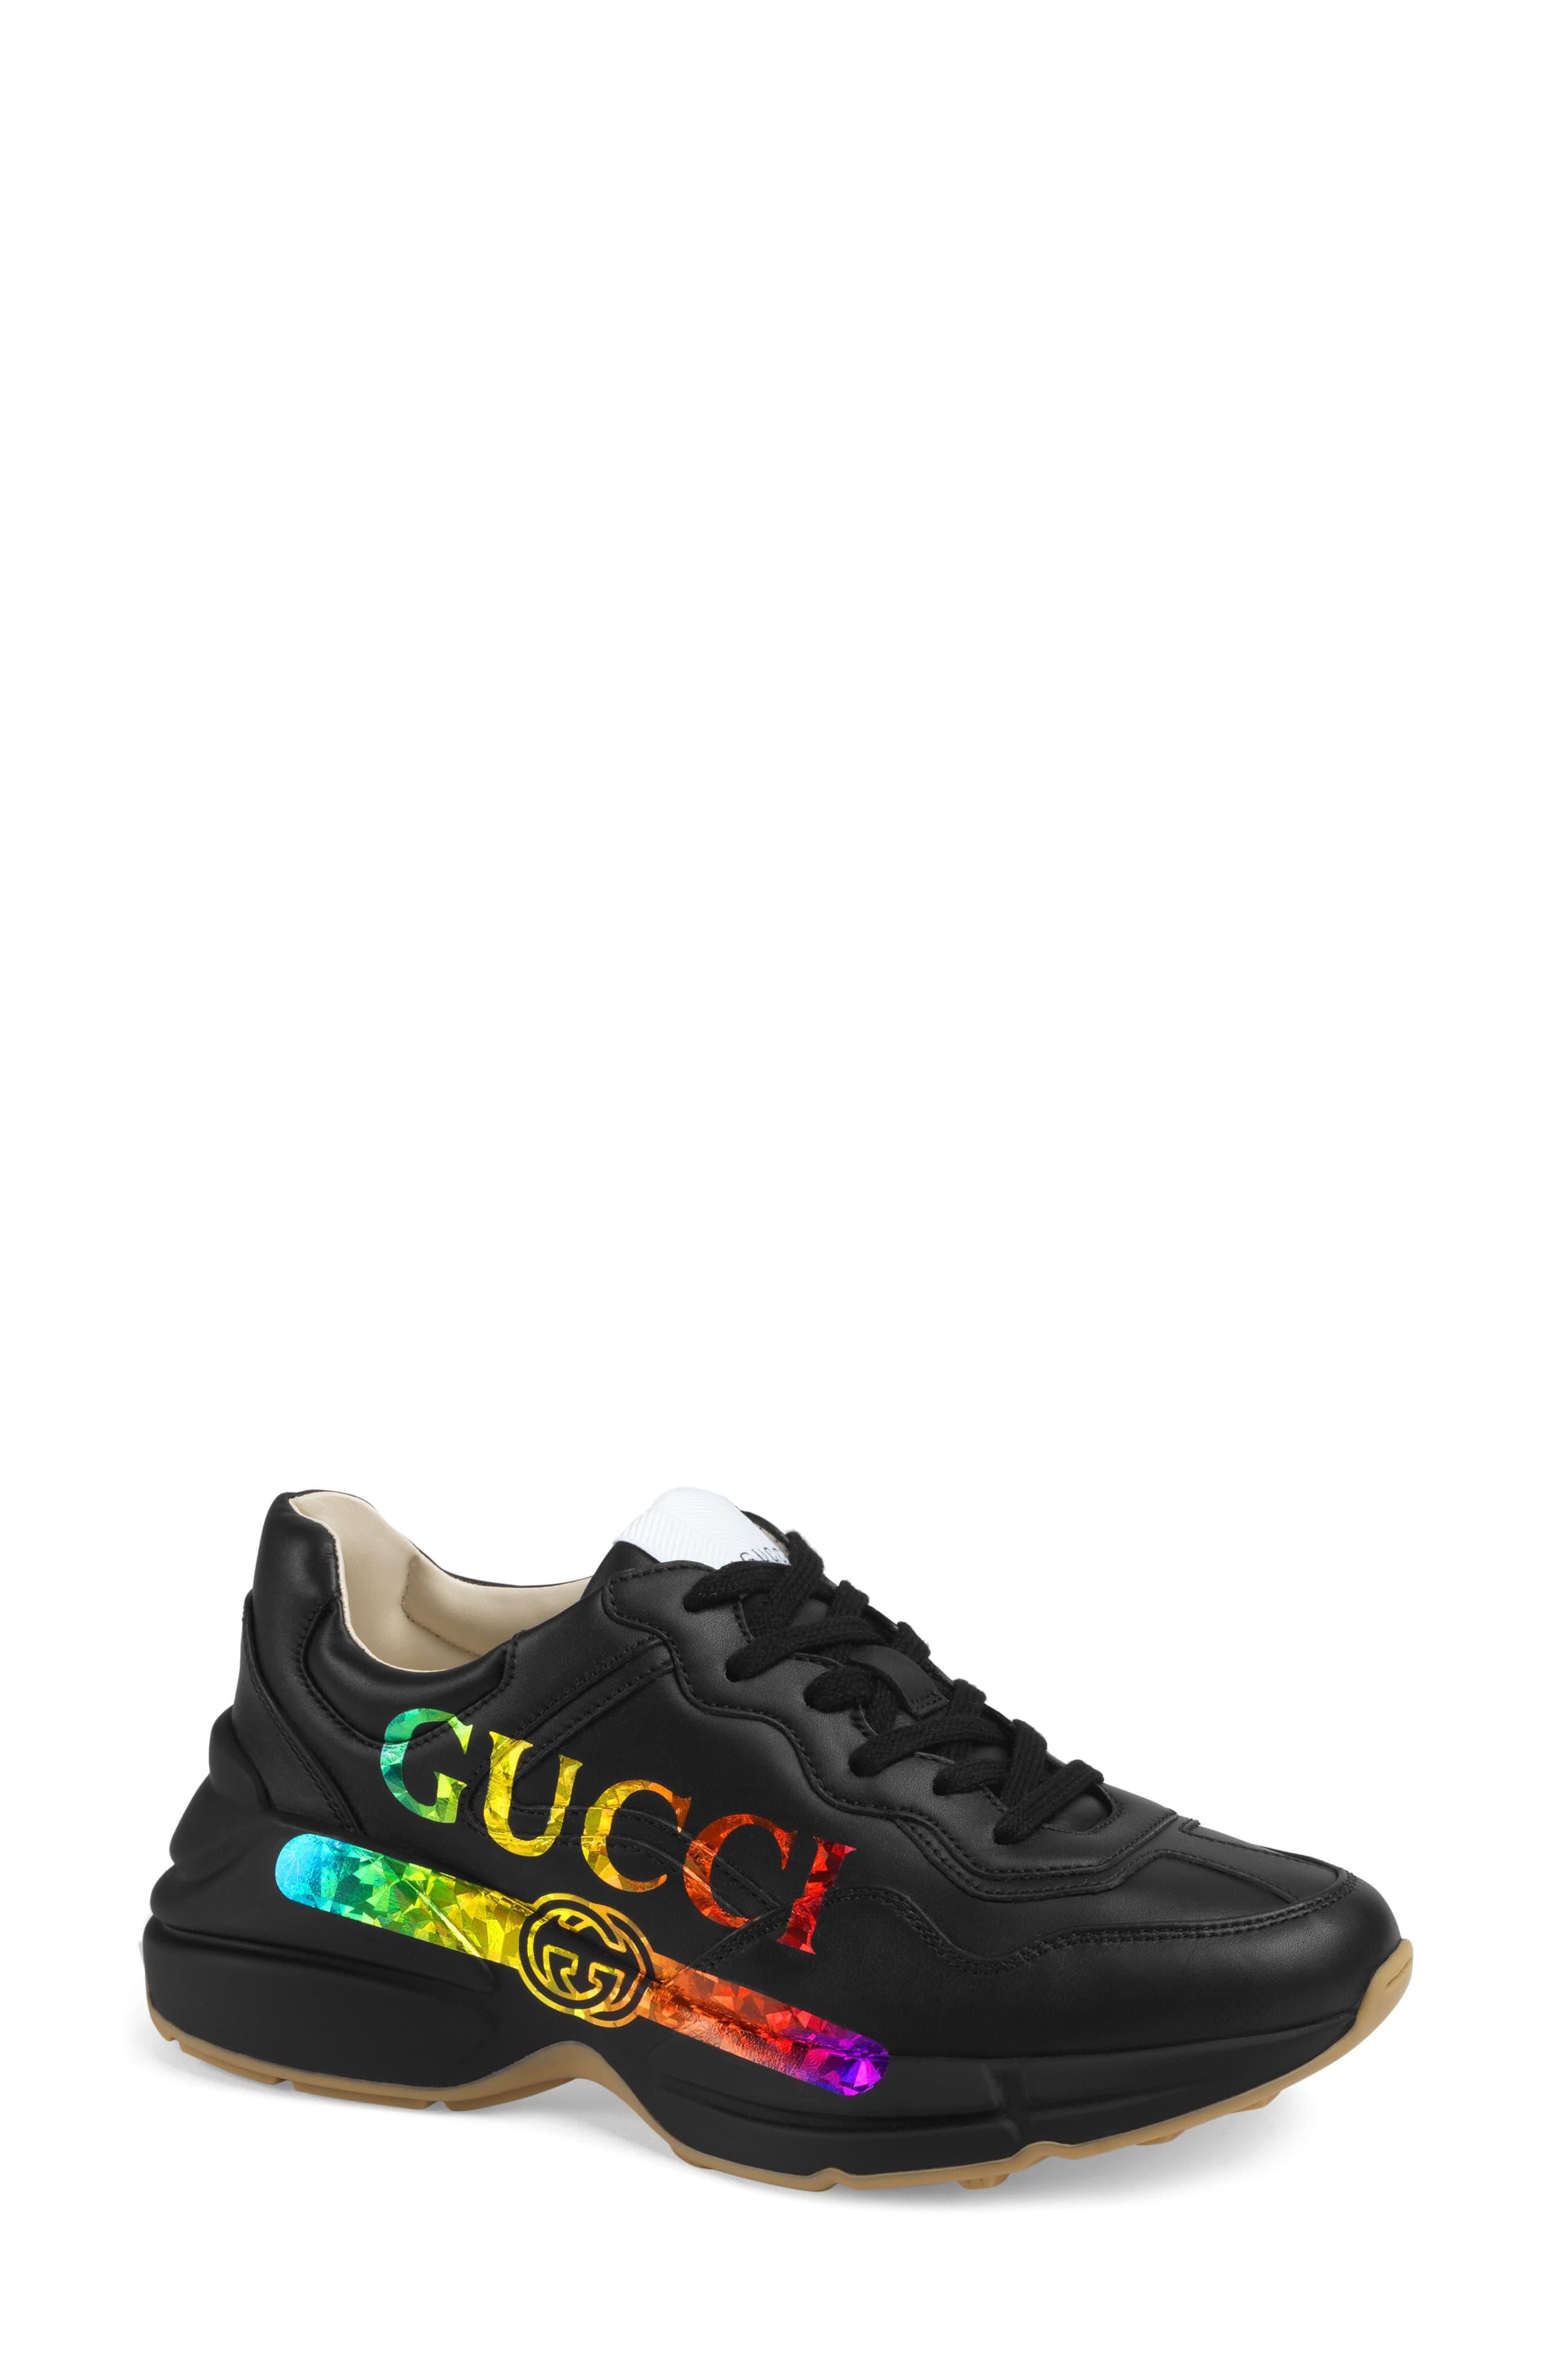 gucci gold rainbow shoes